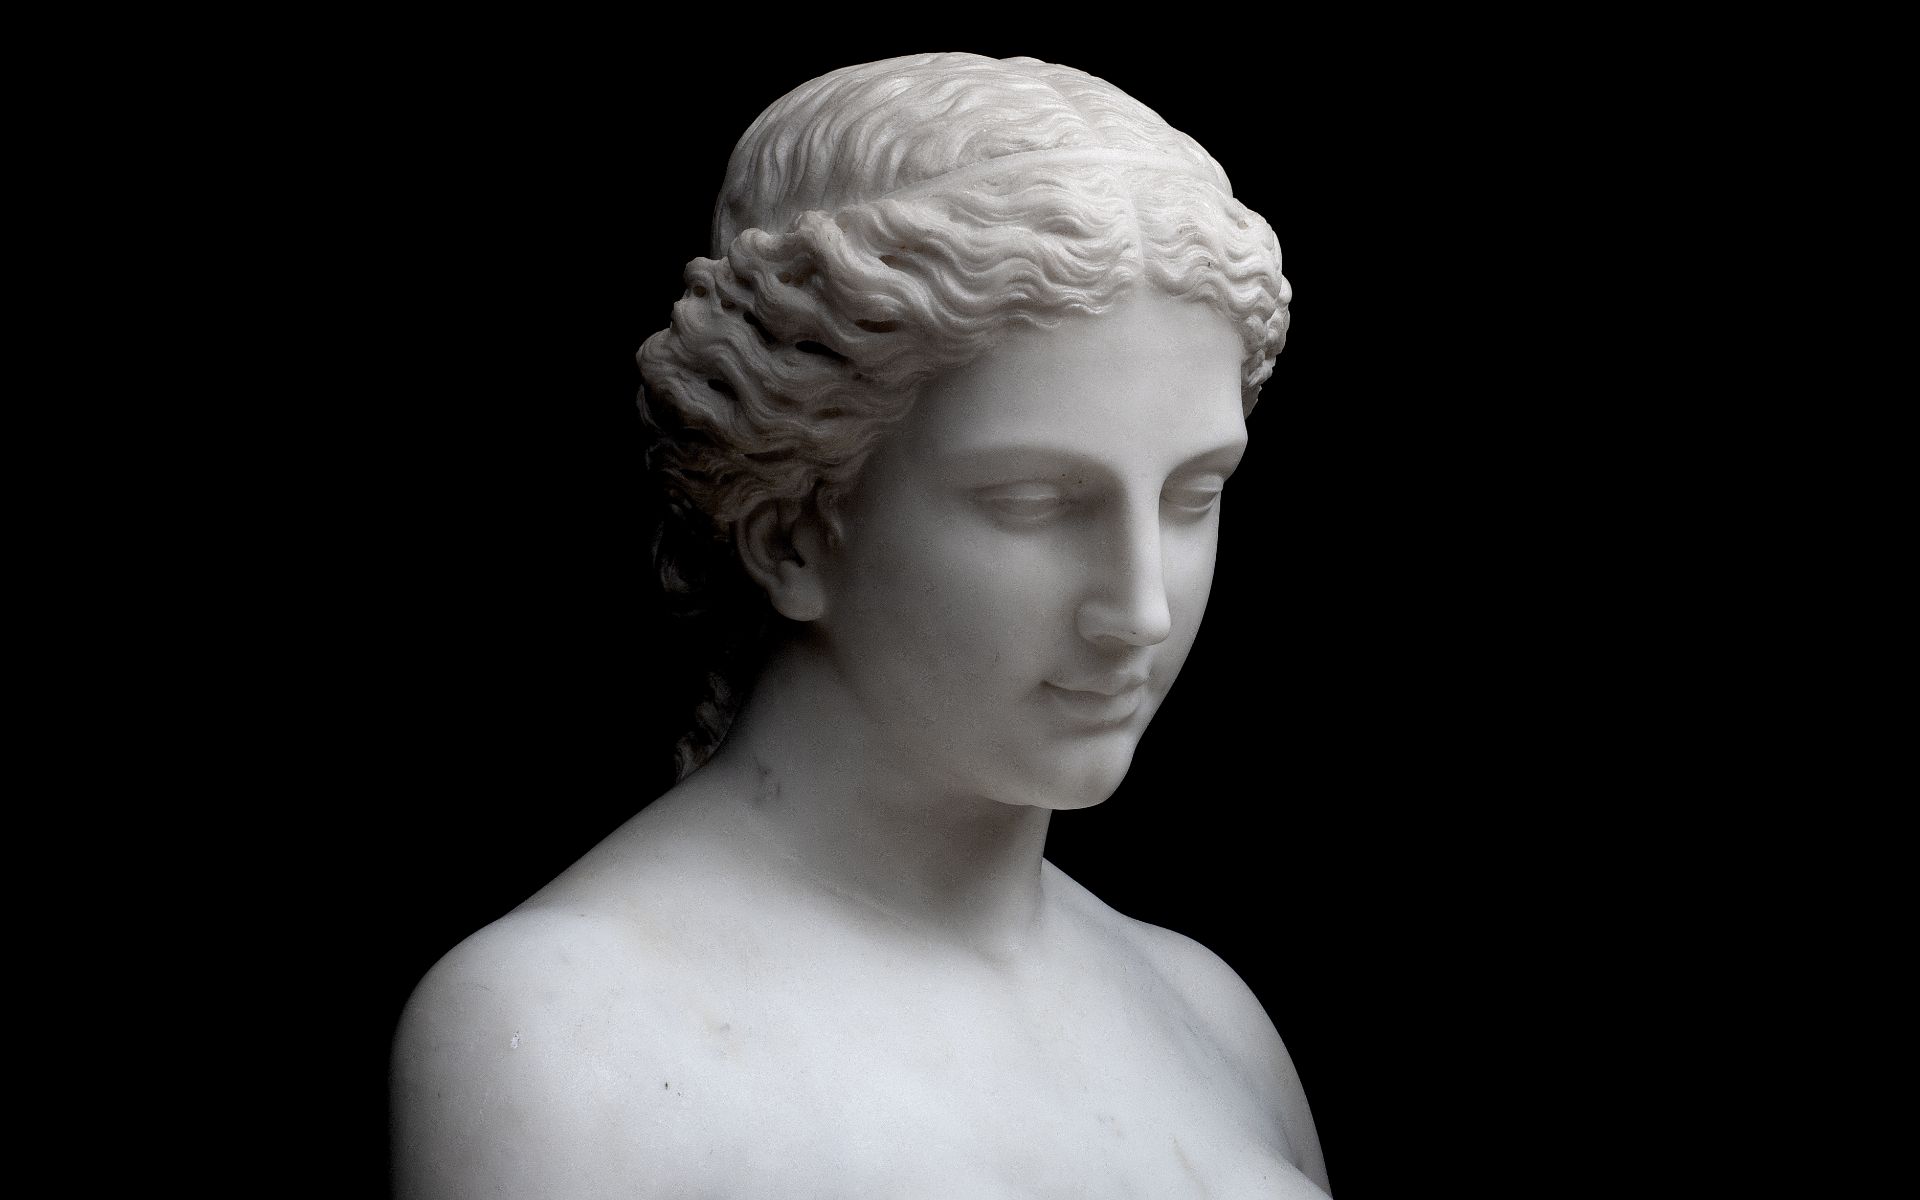 A 19TH CENTURY MARBLE BUST OF EVE, POSSIBLY BY HIRAM POWERS (AMERICAN, 1805-1873) - Image 3 of 3